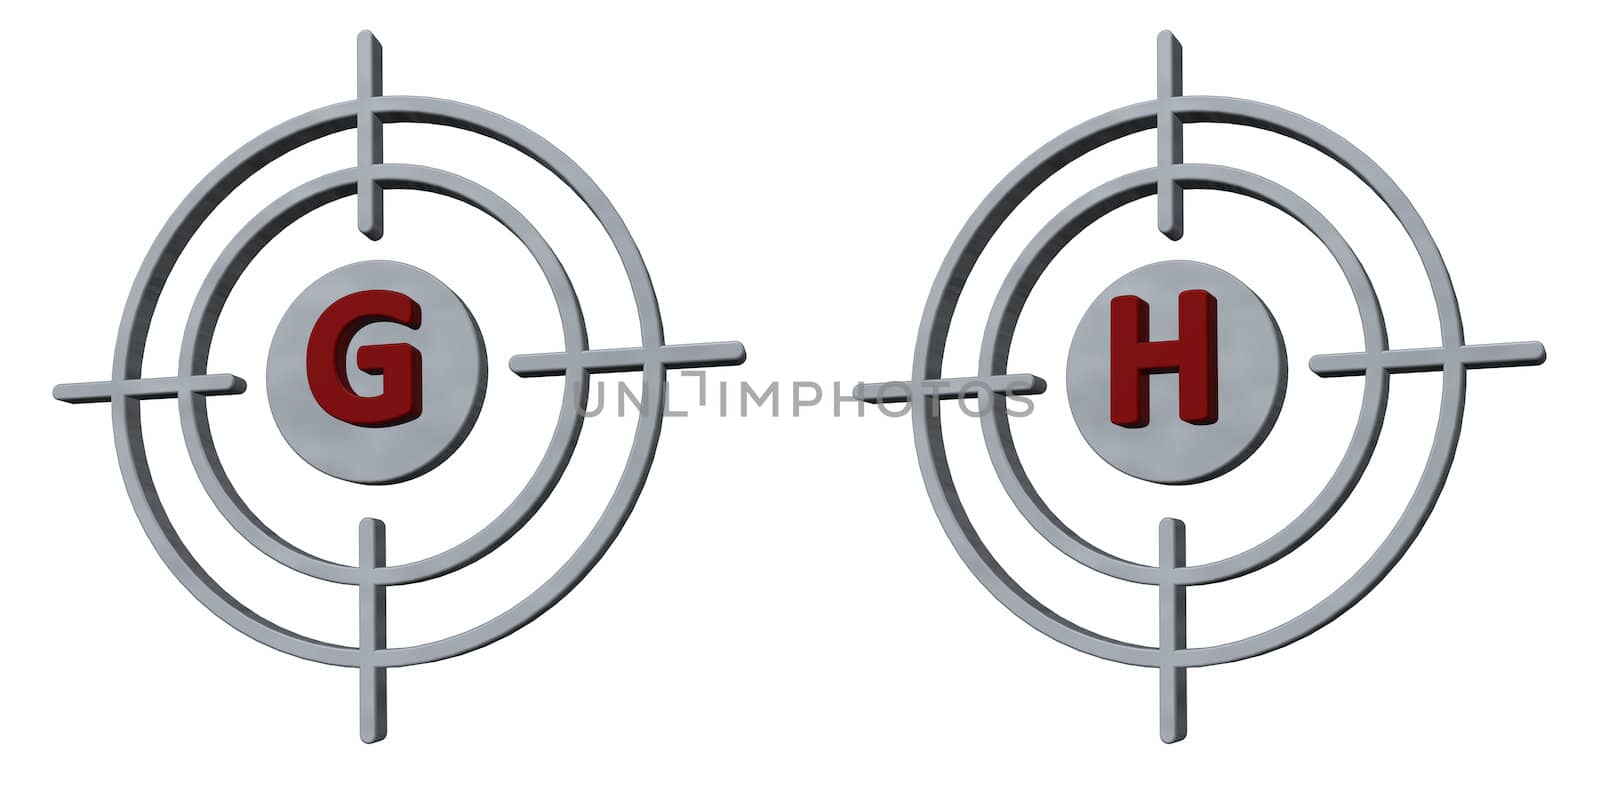 gun sights with the letters gh on white background - 3d illustration